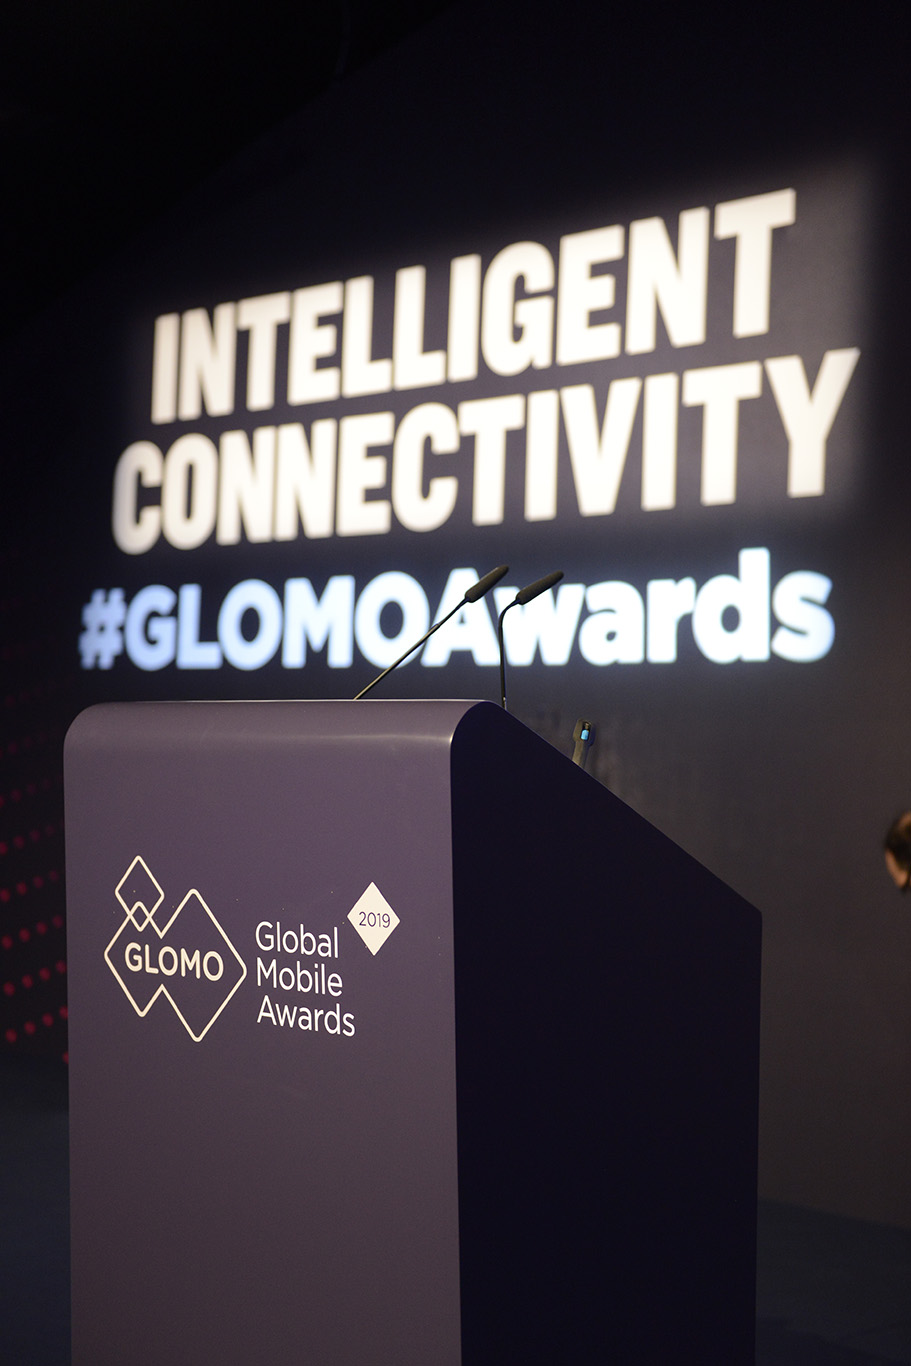 Podium set for announcing the winners at the GloMo Awards ceremony. "Intelligent connectivity #GLOMOAwards" on the backdrop